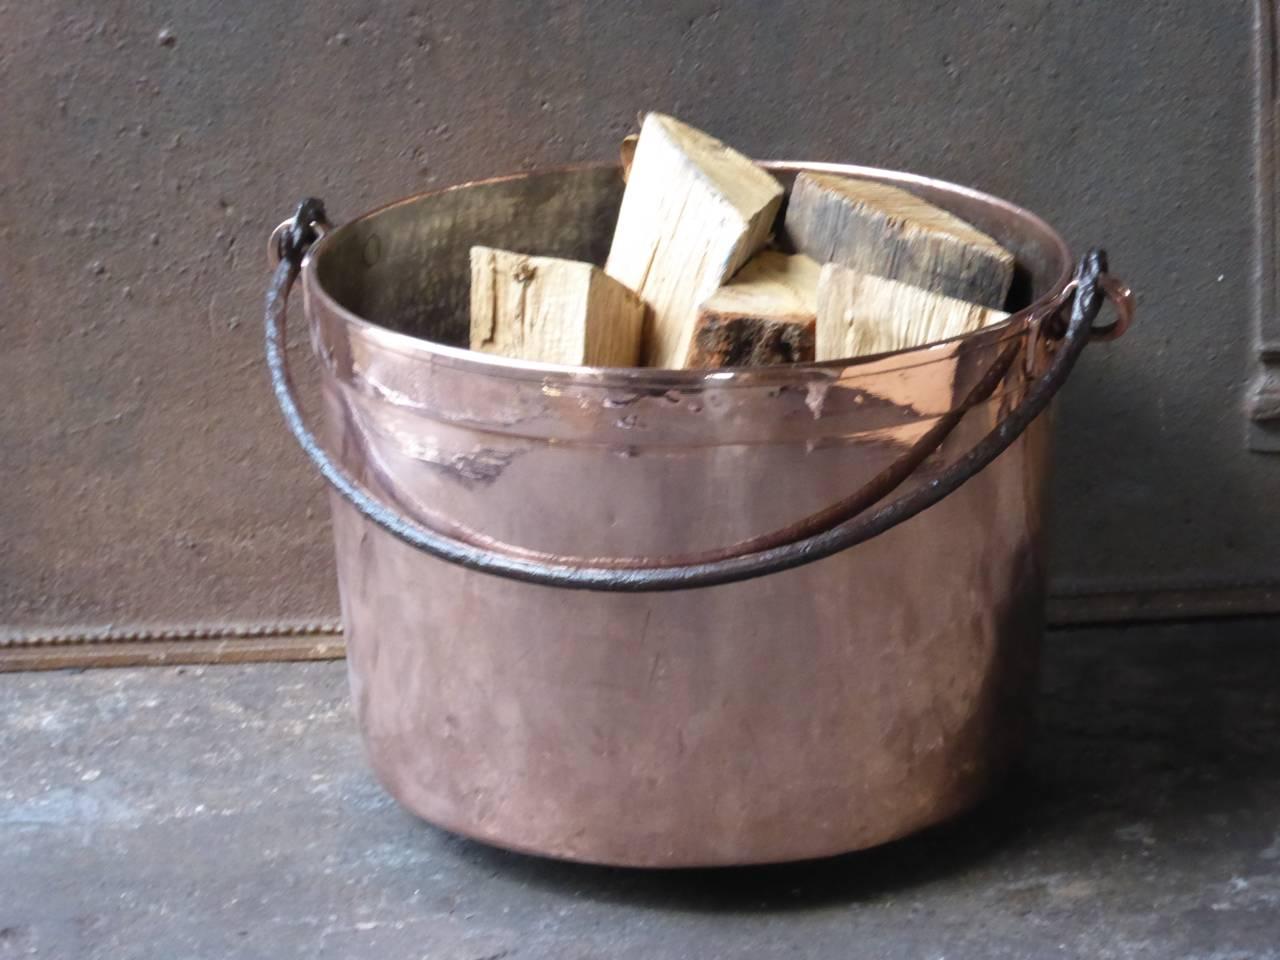 18th century Dutch log bin, firewood holder made of polished copper and wrought iron.